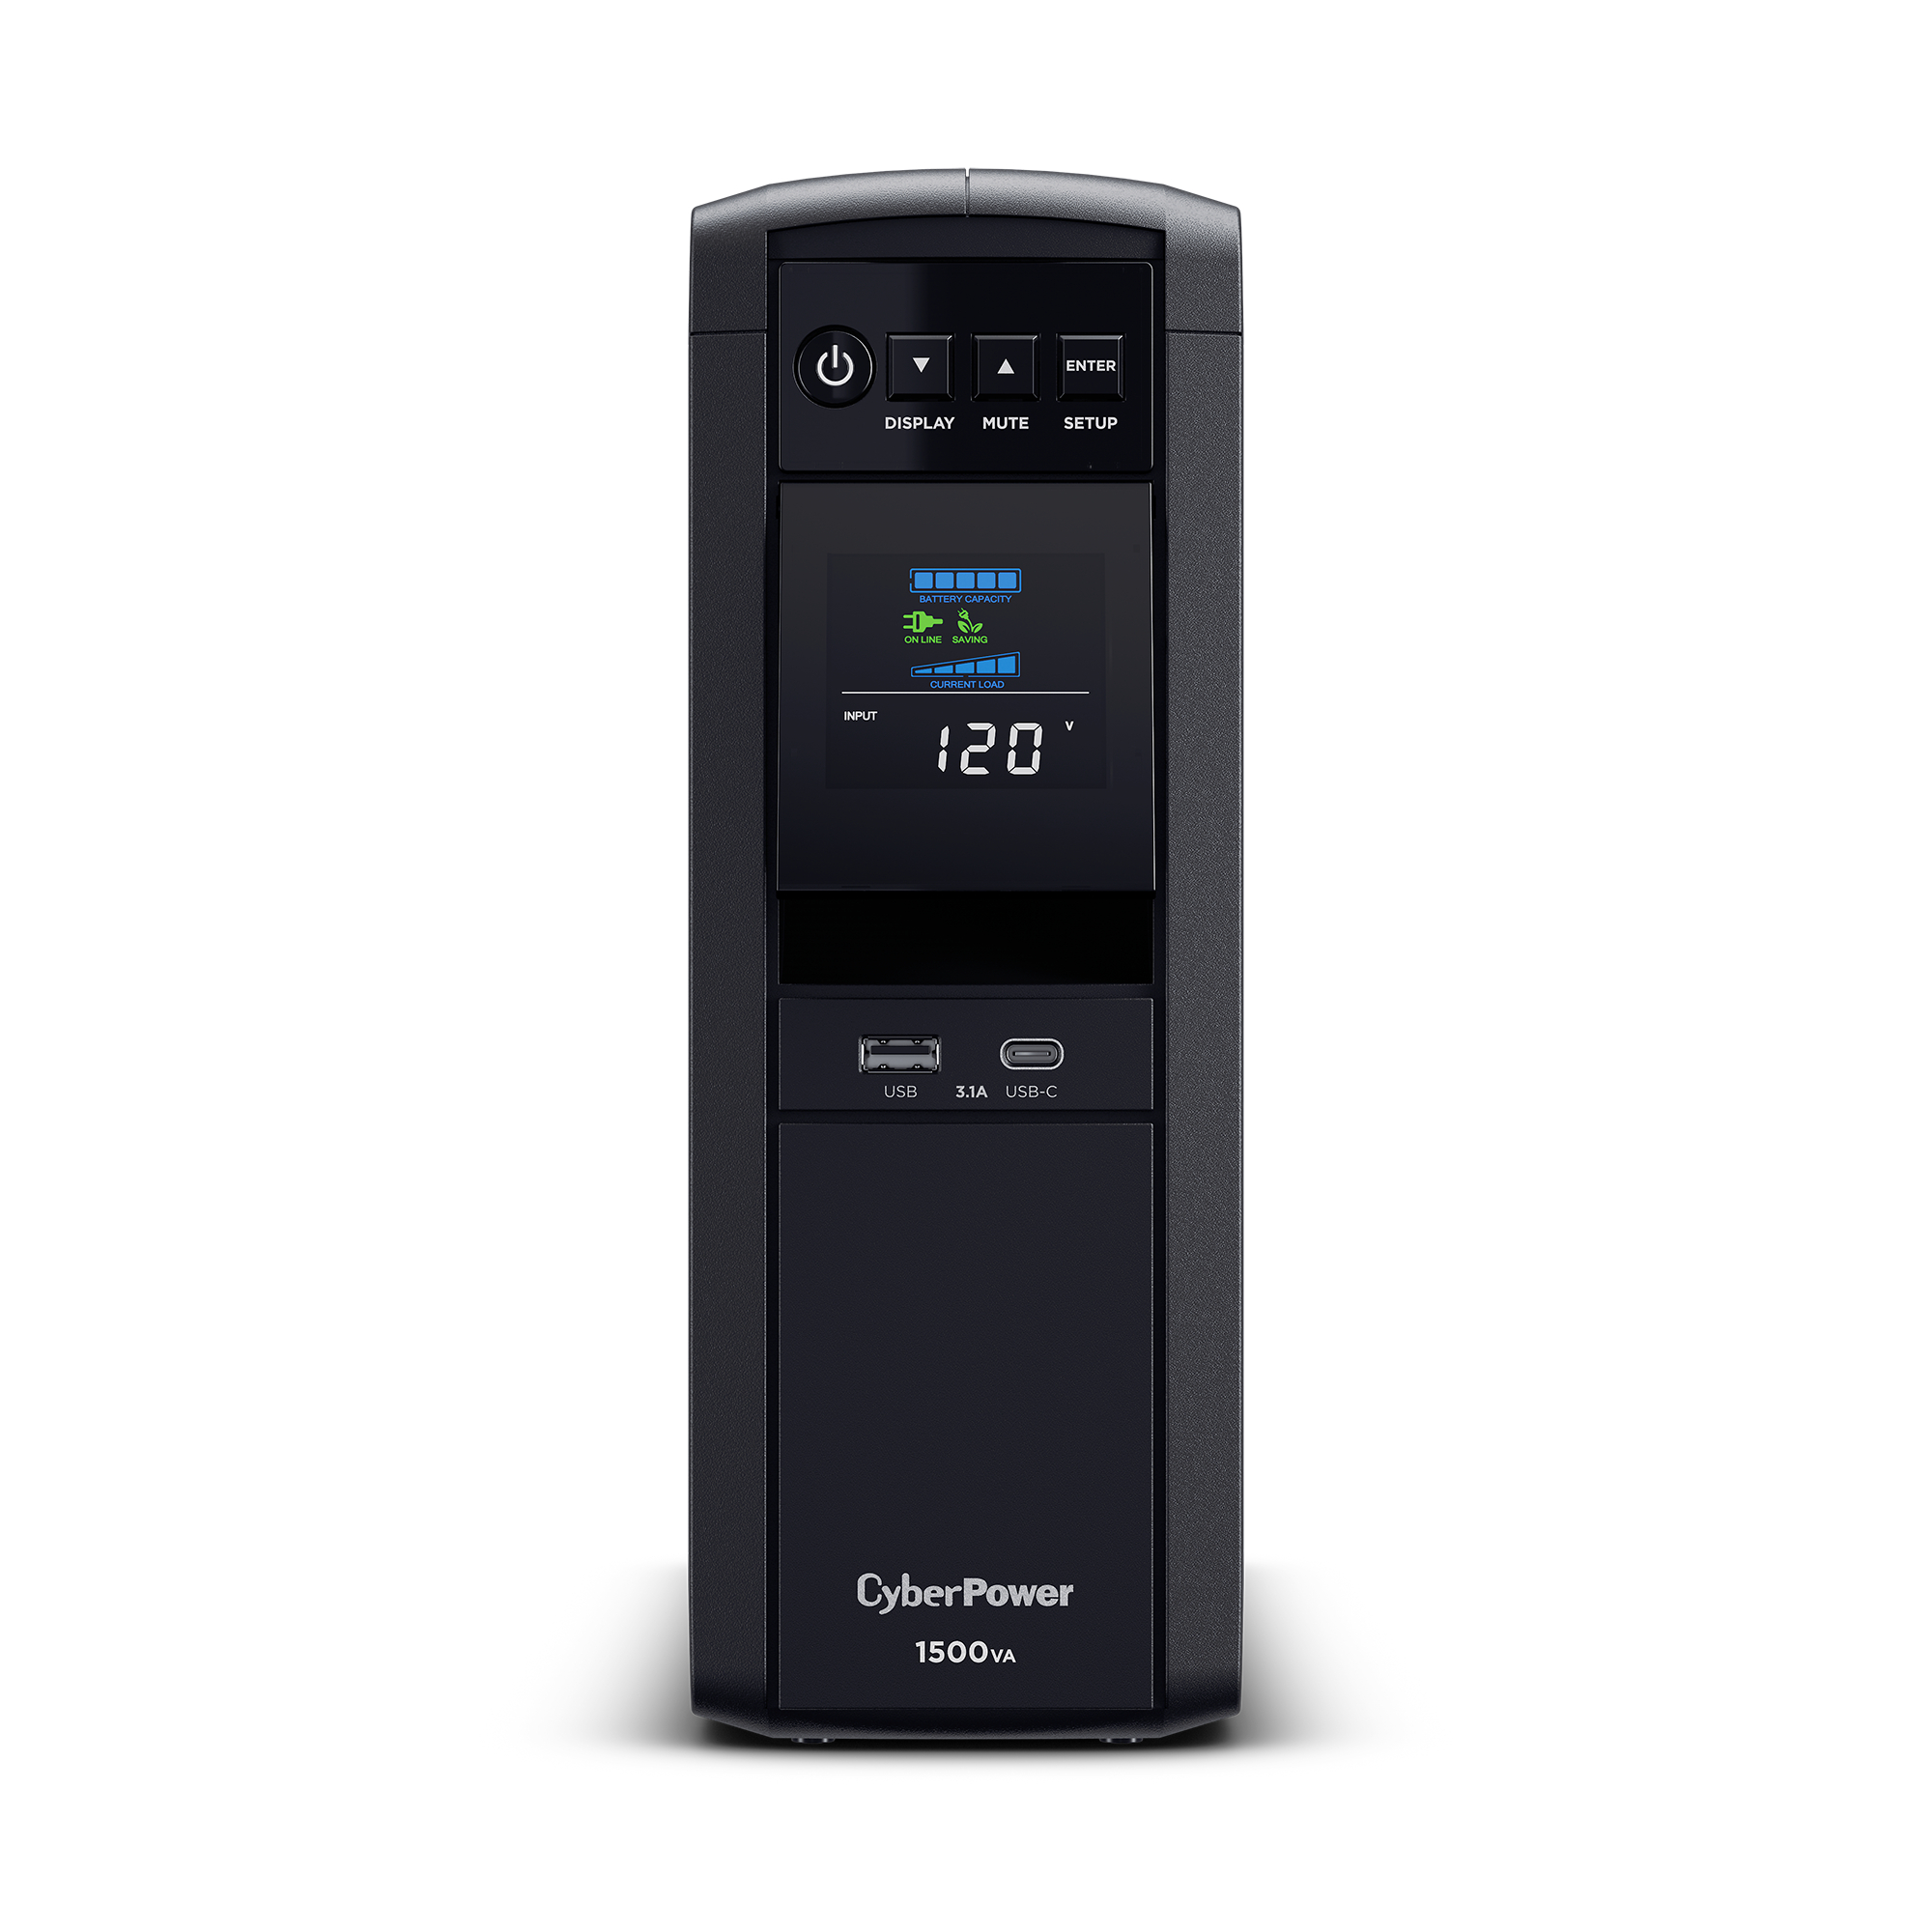 CP1500PFCLCD - PFC Sinewave UPS Series - Product Details, Specs, Downloads | CyberPower